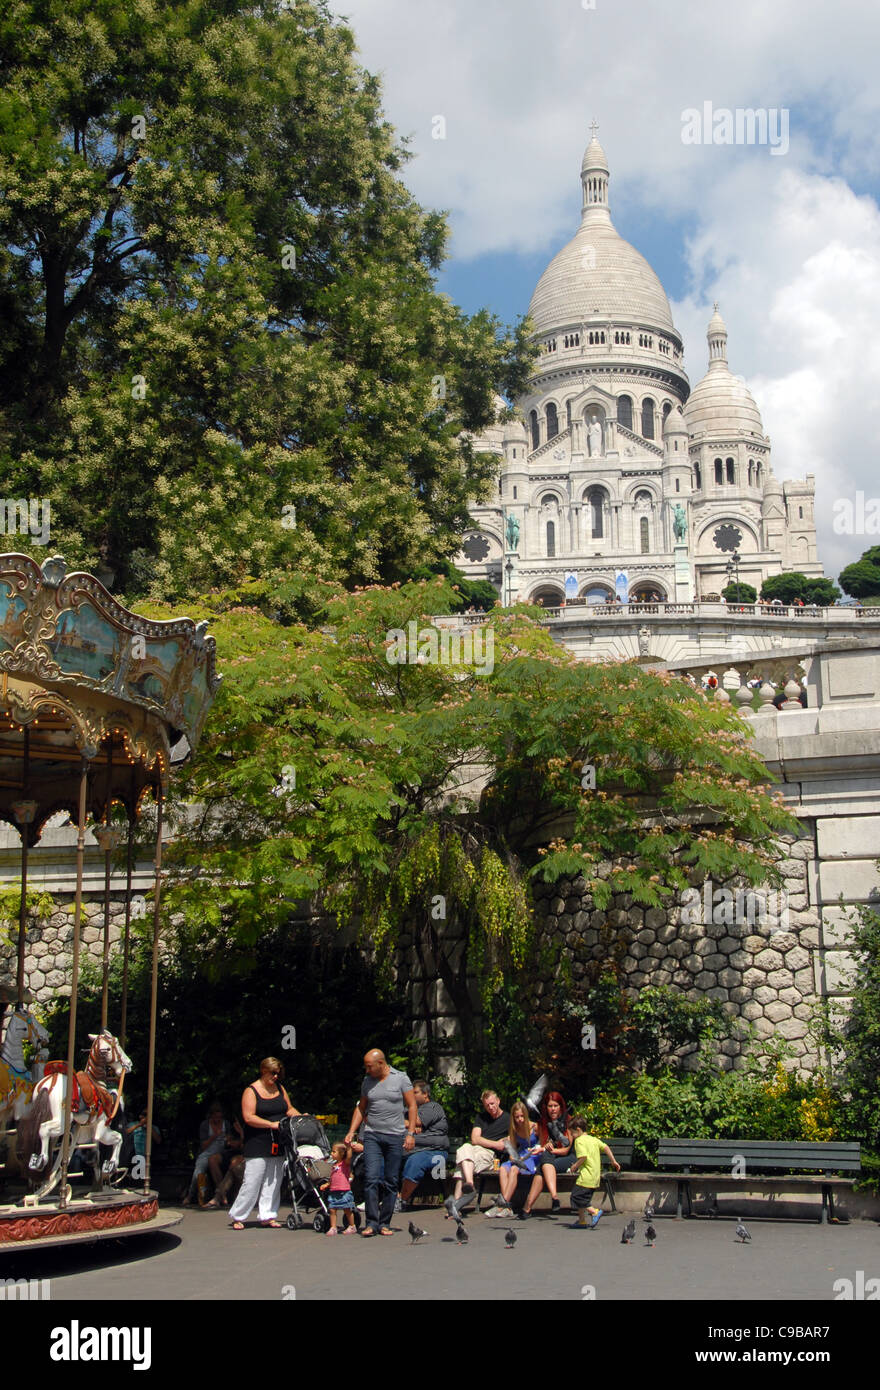 Sacré-Coeur basilica and carrousel on the butte of Montmartre in Paris, France Stock Photo